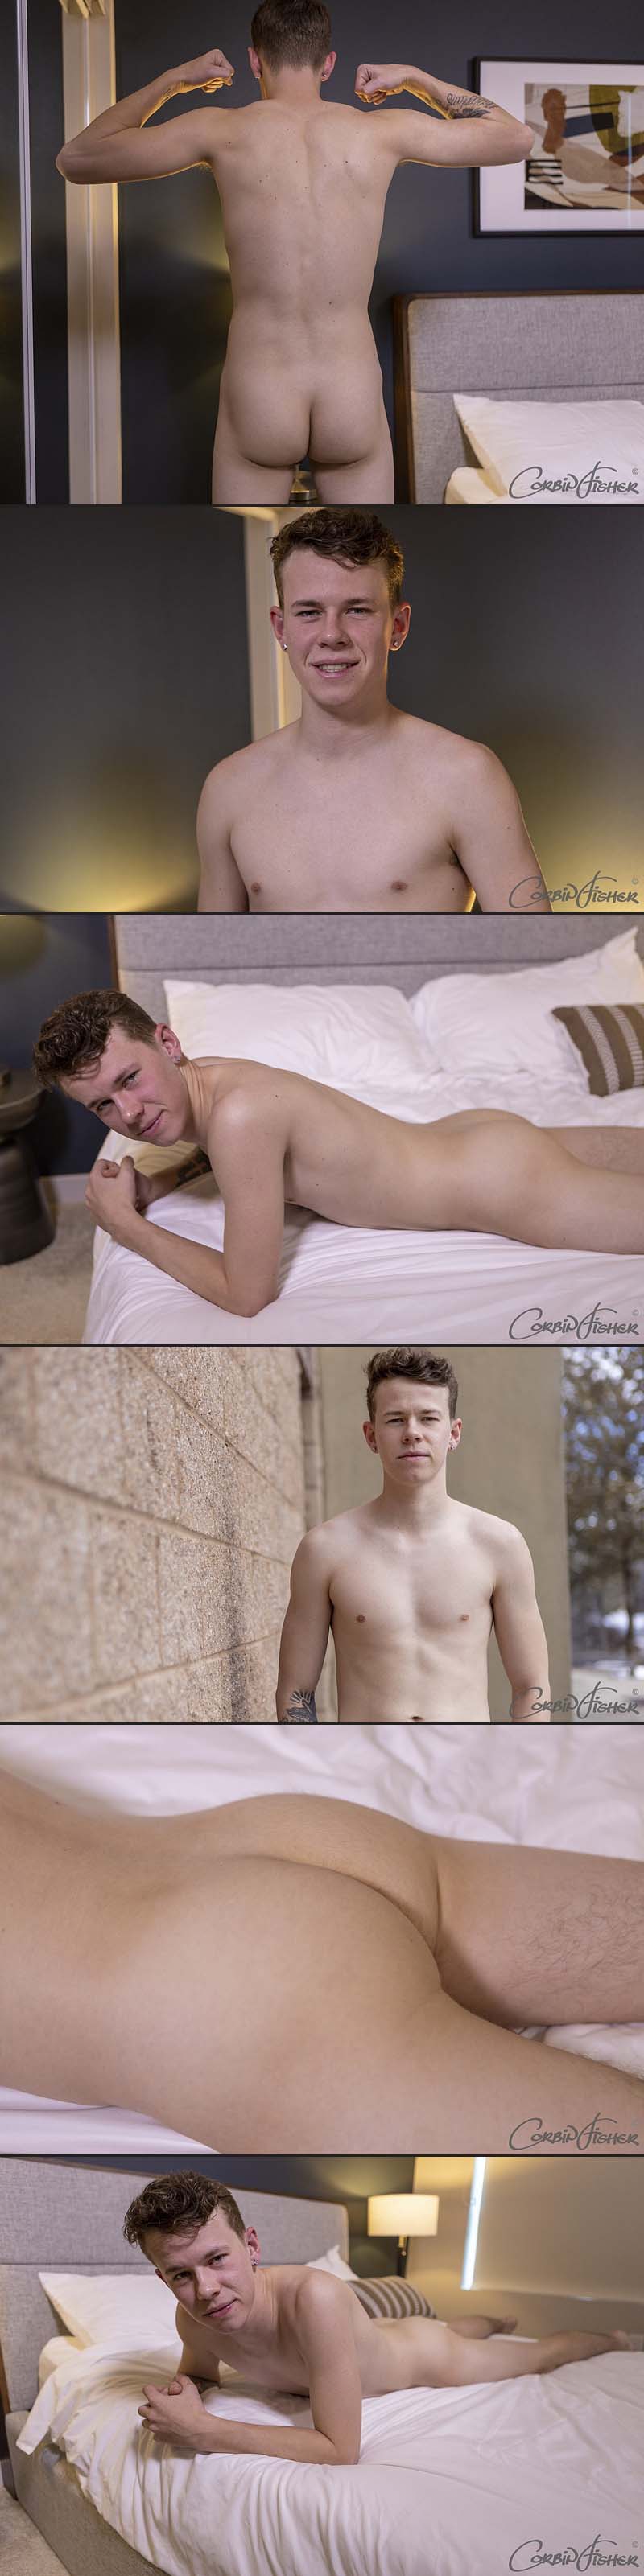 Colby's Cum Makes a Splash at CorbinFisher